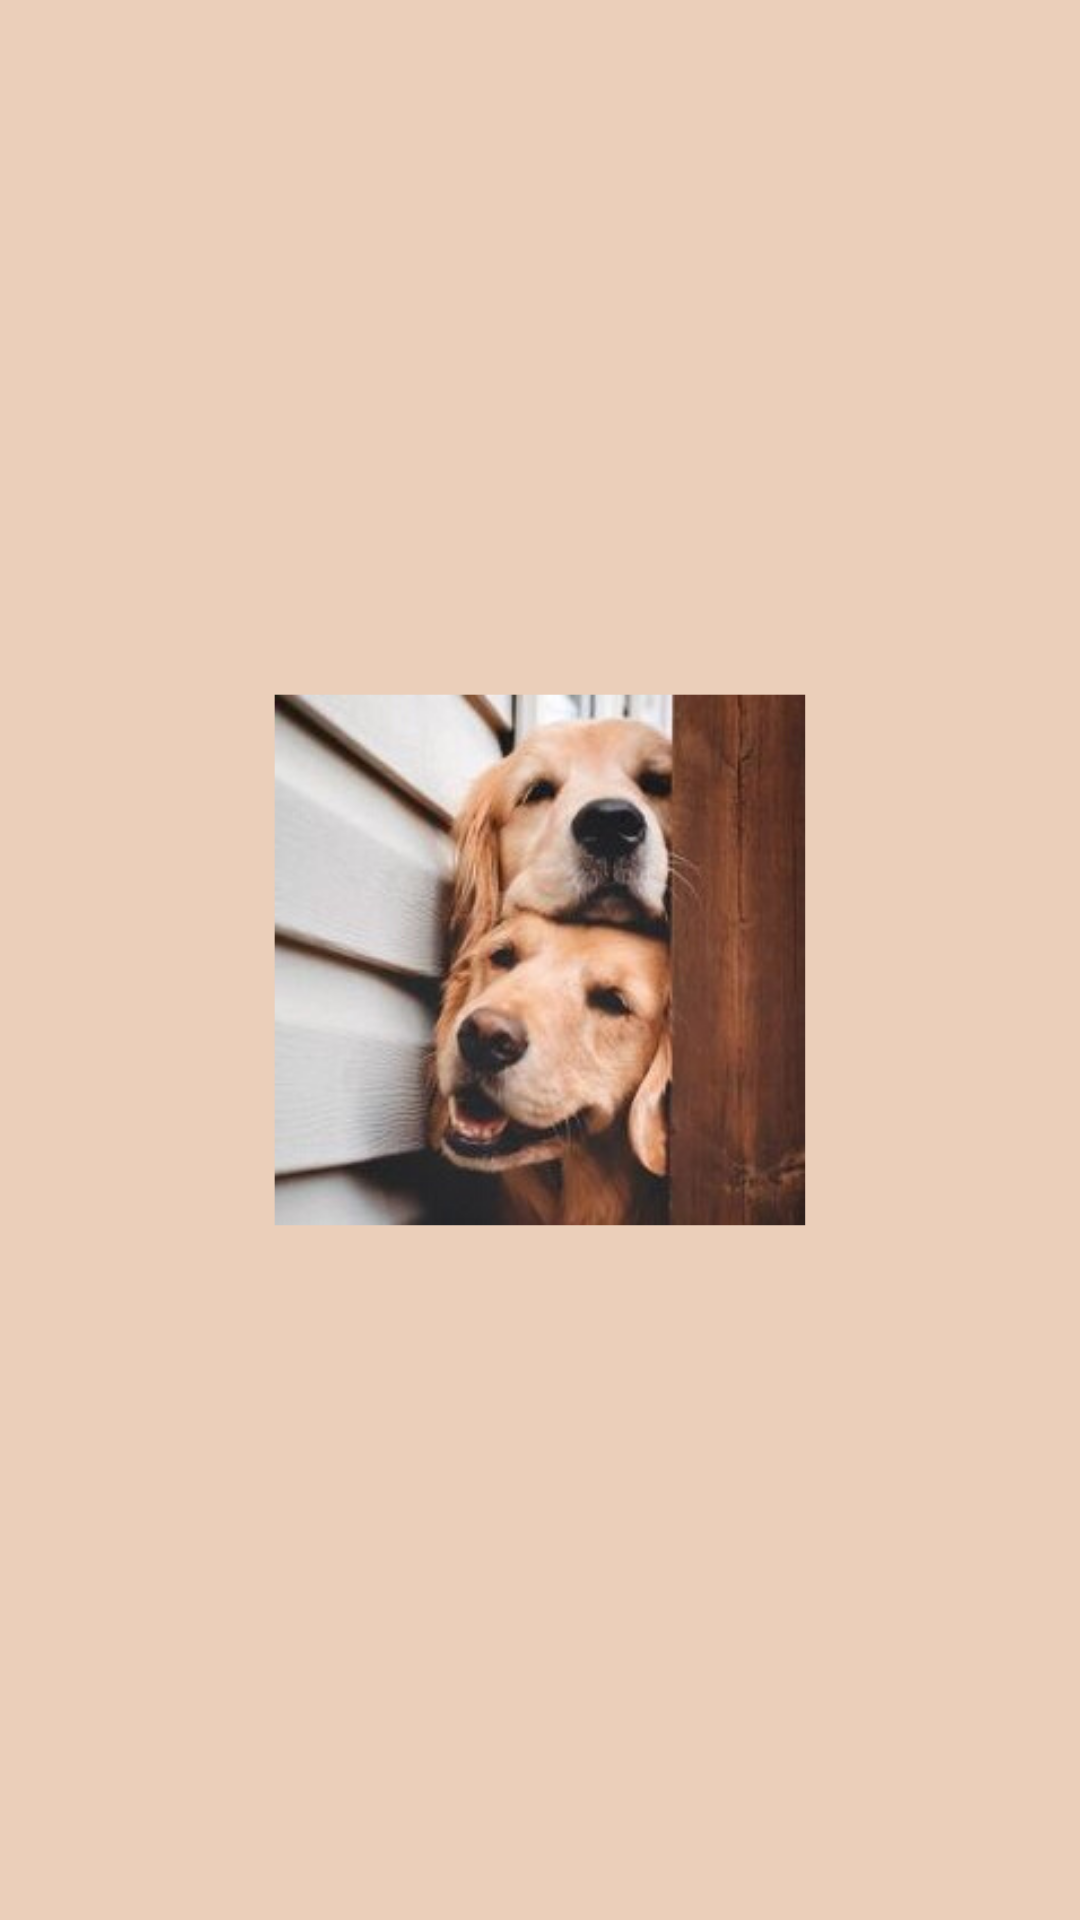  Süße Hunde Hintergrundbild 1080x1920. I created this wallpaper but credits to the owner of the picture. Dog wallpaper, Cute dogs, Cute animals